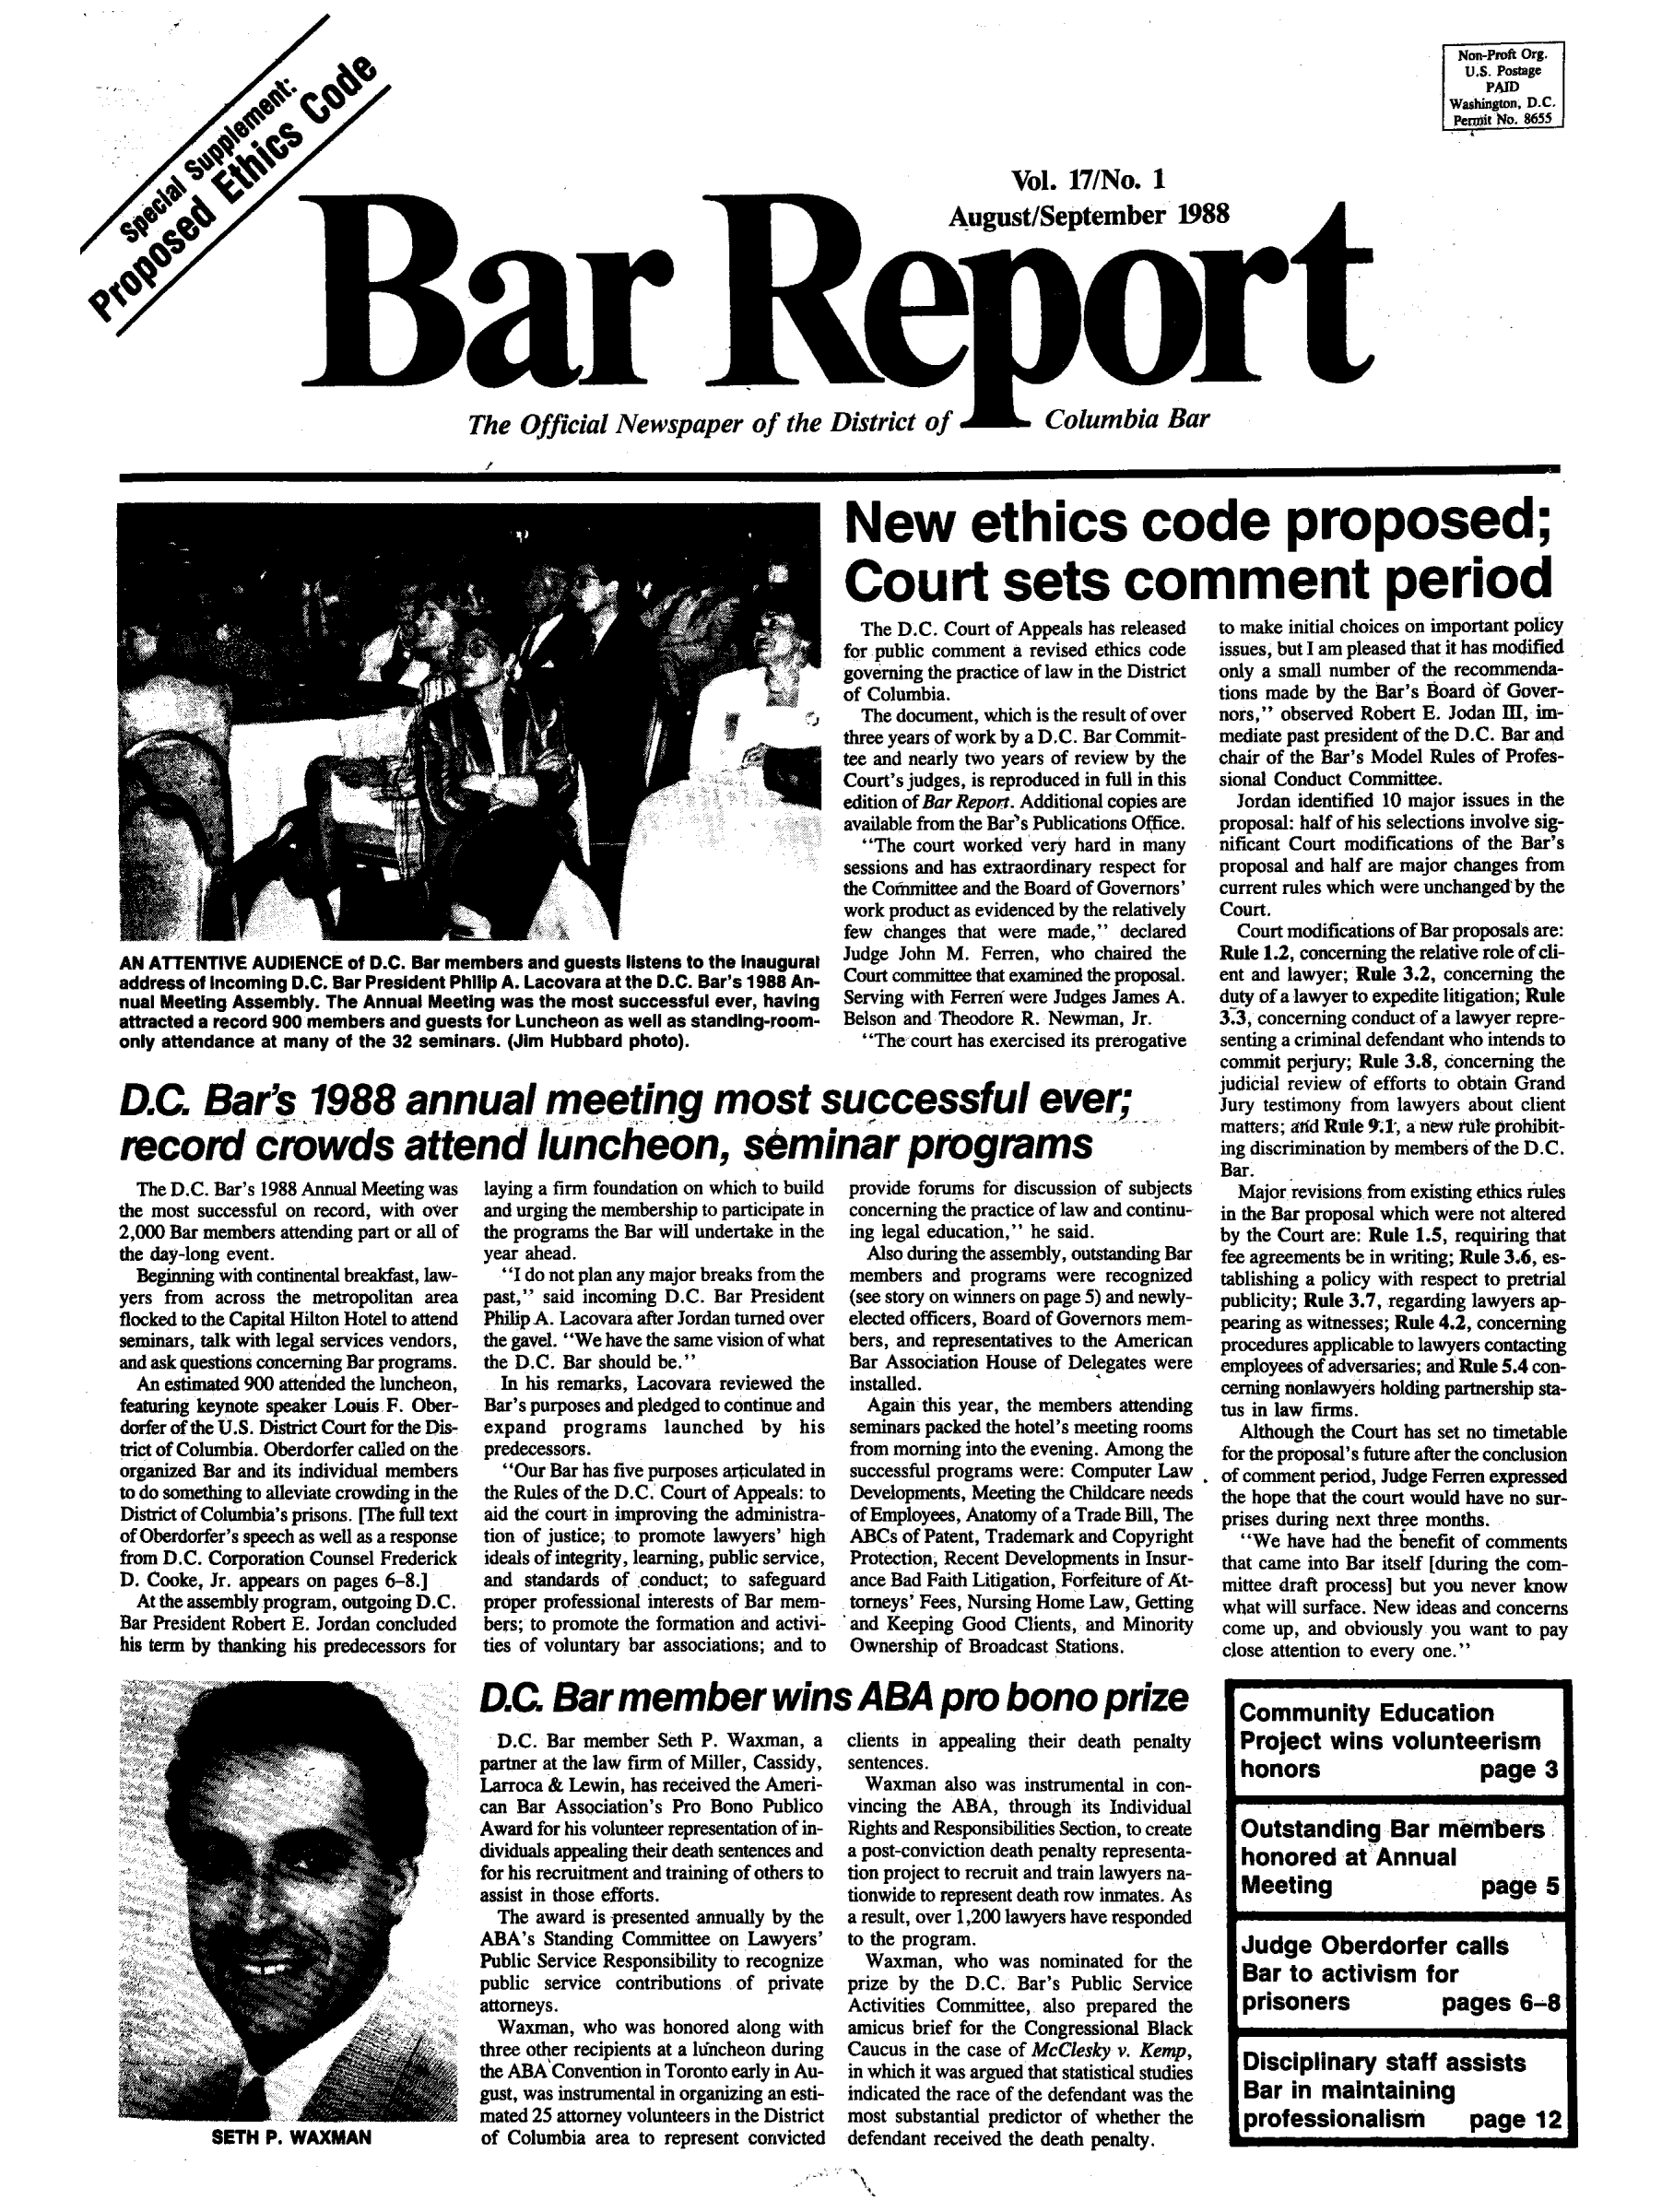 handle is hein.barjournals/breport0017 and id is 1 raw text is: Vol. 17/No. 1
August/September 1988
Bar Reor t
The Official Newspaper of the District of  Columbia Bar
New ethics code proposed;
Court sets comment period

AN ATTENTIVE AUDIENCE of D.C. Bar members and guests listens to the inaugural
address of incoming D.C. Bar President Philip A. Lacovara at the D.C. Bar's 1988 An-
nual Meeting Assembly. The Annual Meeting was the most successful ever, having
attracted a record 900 members and guests for Luncheon as well as standing-room-
only attendance at many of the 32 seminars. (Jim Hubbard photo).

The D.C. Court of Appeals has released
for public comment a revised ethics code
governing the practice of law in the District
of Columbia.
The document, which is the result of over
three years of work by a D.C. Bar Commit-
tee and nearly two years of review by the
Court's judges, is reproduced in full in this
edition of Bar Report. Additional copies are
available from the Bar's Publications Office.
The court worked very hard in many
sessions and has extraordinary respect for
the Committee and the Board of Governors'
work product as evidenced by the relatively
few changes that were made, declared
Judge John M. Ferren, who chaired the
Court committee that examined the proposal.
Serving with Ferren were Judges James A.
Belson and Theodore R. Newman, Jr.
The court has exercised its prerogative

D.C Bar's 1988 annual meeting most successful ever;
record crowds attend luncheon, sbminar programs

The D.C. Bar's 1988 Annual Meeting was
the most successful on record, with over
2,000 Bar members attending part or all of
the day-long event.
Beginning with continental breakfast, law-
yers from across the metropolitan area
flocked to the Capital Hilton Hotel to attend
seminars, talk with legal services vendors,
and ask questions concerning Bar programs.
An estimated 900 atterided the luncheon,
featuring keynote speaker Louis F. Ober-
dorfer of the U.S. District Court for the Dis-
trict of Columbia. Oberdorfer called on the
organized Bar and its individual members
to do something to alleviate crowding in the
District of Columbia's prisons. [The full text
of Oberdorfer's speech as well as a response
from D.C. Corporation Counsel Frederick
D. Cooke, Jr. appears on pages 6-8.]
At the assembly program, outgoing D.C.
Bar President Robert E. Jordan concluded
his term by thanking his predecessors for

laying a firm foundation on which to build
and urging the membership to participate in
the programs the Bar will undertake in the
year ahead.
I do not plan any major breaks from the
past,' said incoming D.C. Bar President
Philip A. Lacovara after Jordan turned over
the gavel. We have the same vision of what
the D.C. Bar should be.
In his remarks, Lacovara reviewed the
Bar's purposes and pledged to continue and
expand programs launched by his
predecessors.
Our Bar has five purposes articulated in
the Rules of the D.C. Court of Appeals: to
aid the court in improving the administra-
tion of justice; to promote lawyers' high
ideals of integrity, learning, public service,
and standards of conduct; to safeguard
proper professional interests of Bar mem-
bers; to promote the formation and activi-
ties of voluntary bar associations; and to

provide forums for discussion of subjects
concerning the practice of law and continu-
ing legal education, he said.
Also during the assembly, outstanding Bar
members and programs were recognized
(see story on winners on page 5) and newly-
elected officers, Board of Governors mem-
bers, and representatives to the American
Bar Association House of Delegates were
installed.
Again this year, the members attending
seminars packed the hotel's meeting rooms
from morning into the evening. Among the
successful programs were: Computer Law
Developments, Meeting the Childcare needs
of Employees, Anatomy of a Trade Bill, The
ABCs of Patent, Trademark and Copyright
Protection, Recent Developments in Insur-
ance Bad Faith Litigation, Forfeiture of At-
torneys' Fees, Nursing Home Law, Getting
and Keeping Good Clients, and Minority
Ownership of Broadcast Stations.

Non-Proft Org.
U.S. Postage
PAID
washington, D.C.
Peralt No. 8655

to make initial choices on important policy
issues, but I am pleased that it has modified
only a small number of the recommenda-
tions made by the Bar's Board of Gover-
nors, observed Robert E. Jodan m, im-
mediate past president of the D.C. Bar and
chair of the Bar's Model Rules of Profes-
sional Conduct Committee.
Jordan identified 10 major issues in the
proposal: half of his selections involve sig-
nificant Court modifications of the Bar's
proposal and half are major changes from
current rules which were unchanged by the
Court.
Court modifications of Bar proposals are:
Rule 1.2, concerning the relative role of cli-
ent and lawyer; Rule 3.2, concerning the
duty of a lawyer to expedite litigation; Rule
3.3, concerning conduct of a lawyer repre-
senting a criminal defendant who intends to
commit perjury; Rule 3.8, concerning the
judicial review of efforts to obtain Grand
Jury testimony from lawyers about client
matters; and Rule 9.1, a new rule prohibit-
ing discrimination by members of the D.C.
Bar.
Major revisions from existing ethics rules
in the Bar proposal which were not altered
by the Court are: Rule 1.5, requiring that
fee agreements be in writing; Rule 3.6, es-
tablishing a policy with respect to pretrial
publicity; Rule 3.7, regarding lawyers ap-
pearing as witnesses; Rule 4.2, concerning
procedures applicable to lawyers contacting
employees of adversaries; and Rule 5.4 con-
cerning nonlawyers holding partnership sta-
tus in law firms.
Although the Court has set no timetable
for the proposal's future after the conclusion
of comment period, Judge Ferren expressed
the hope that the court would have no sur-
prises during next three months.
We have had the benefit of comments
that came into Bar itself [during the com-
mittee draft process] but you never know
what will surface. New ideas and concerns
come up, and obviously you want to pay
close attention to every one.

D.C Bar member wins ABAprobono prize

D.C. Bar member Seth P. Waxman, a
partner at the law firm of Miller, Cassidy,
Larroca & Lewin, has received the Ameri-
can Bar Association's Pro Bono Publico
Award for his volunteer representation of in-
dividuals appealing their death sentences and
for his recruitment and training of others to
assist in those efforts.
The award is presented annually by the
ABA's Standing Committee on Lawyers'
Public Service Responsibility to recognize
public service contributions of private
attorneys.
Waxman, who was honored along with
three other recipients at a luncheon during
the ABA Convention in Toronto early in Au-
gust, was instrumental in organizing an esti-
mated 25 attorney volunteers in the District
of Columbia area to represent convicted

clients in appealing their death penalty
sentences.
Waxman also was instrumental in con-
vincing the ABA, through its Individual
Rights and Responsibilities Section, to create
a post-conviction death penalty representa-
tion project to recruit and train lawyers na-
tionwide to represent death row inmates. As
a result, over 1,200 lawyers have responded
to the program.
Waxman, who was nominated for the
prize by the D.C. Bar's Public Service
Activities Committee, also prepared the
amicus brief for the Congressional Black
Caucus in the case of McClesky v. Kemp,
in which it was argued that statistical studies
indicated the race of the defendant was the
most substantial predictor of whether the
defendant received the death penalty.

ai m P. WAXMAN

Community Education
Project wins volunteerism
honors           page 3
Outstanding Bar merrmbers
honored at Annual
Meeting          page 5
Judge Oberdorfer calls
Bar to activism for
prisoners     pages 6-8
Disciplinary staff assists
Bar in maintaining
professionalism  page 12


